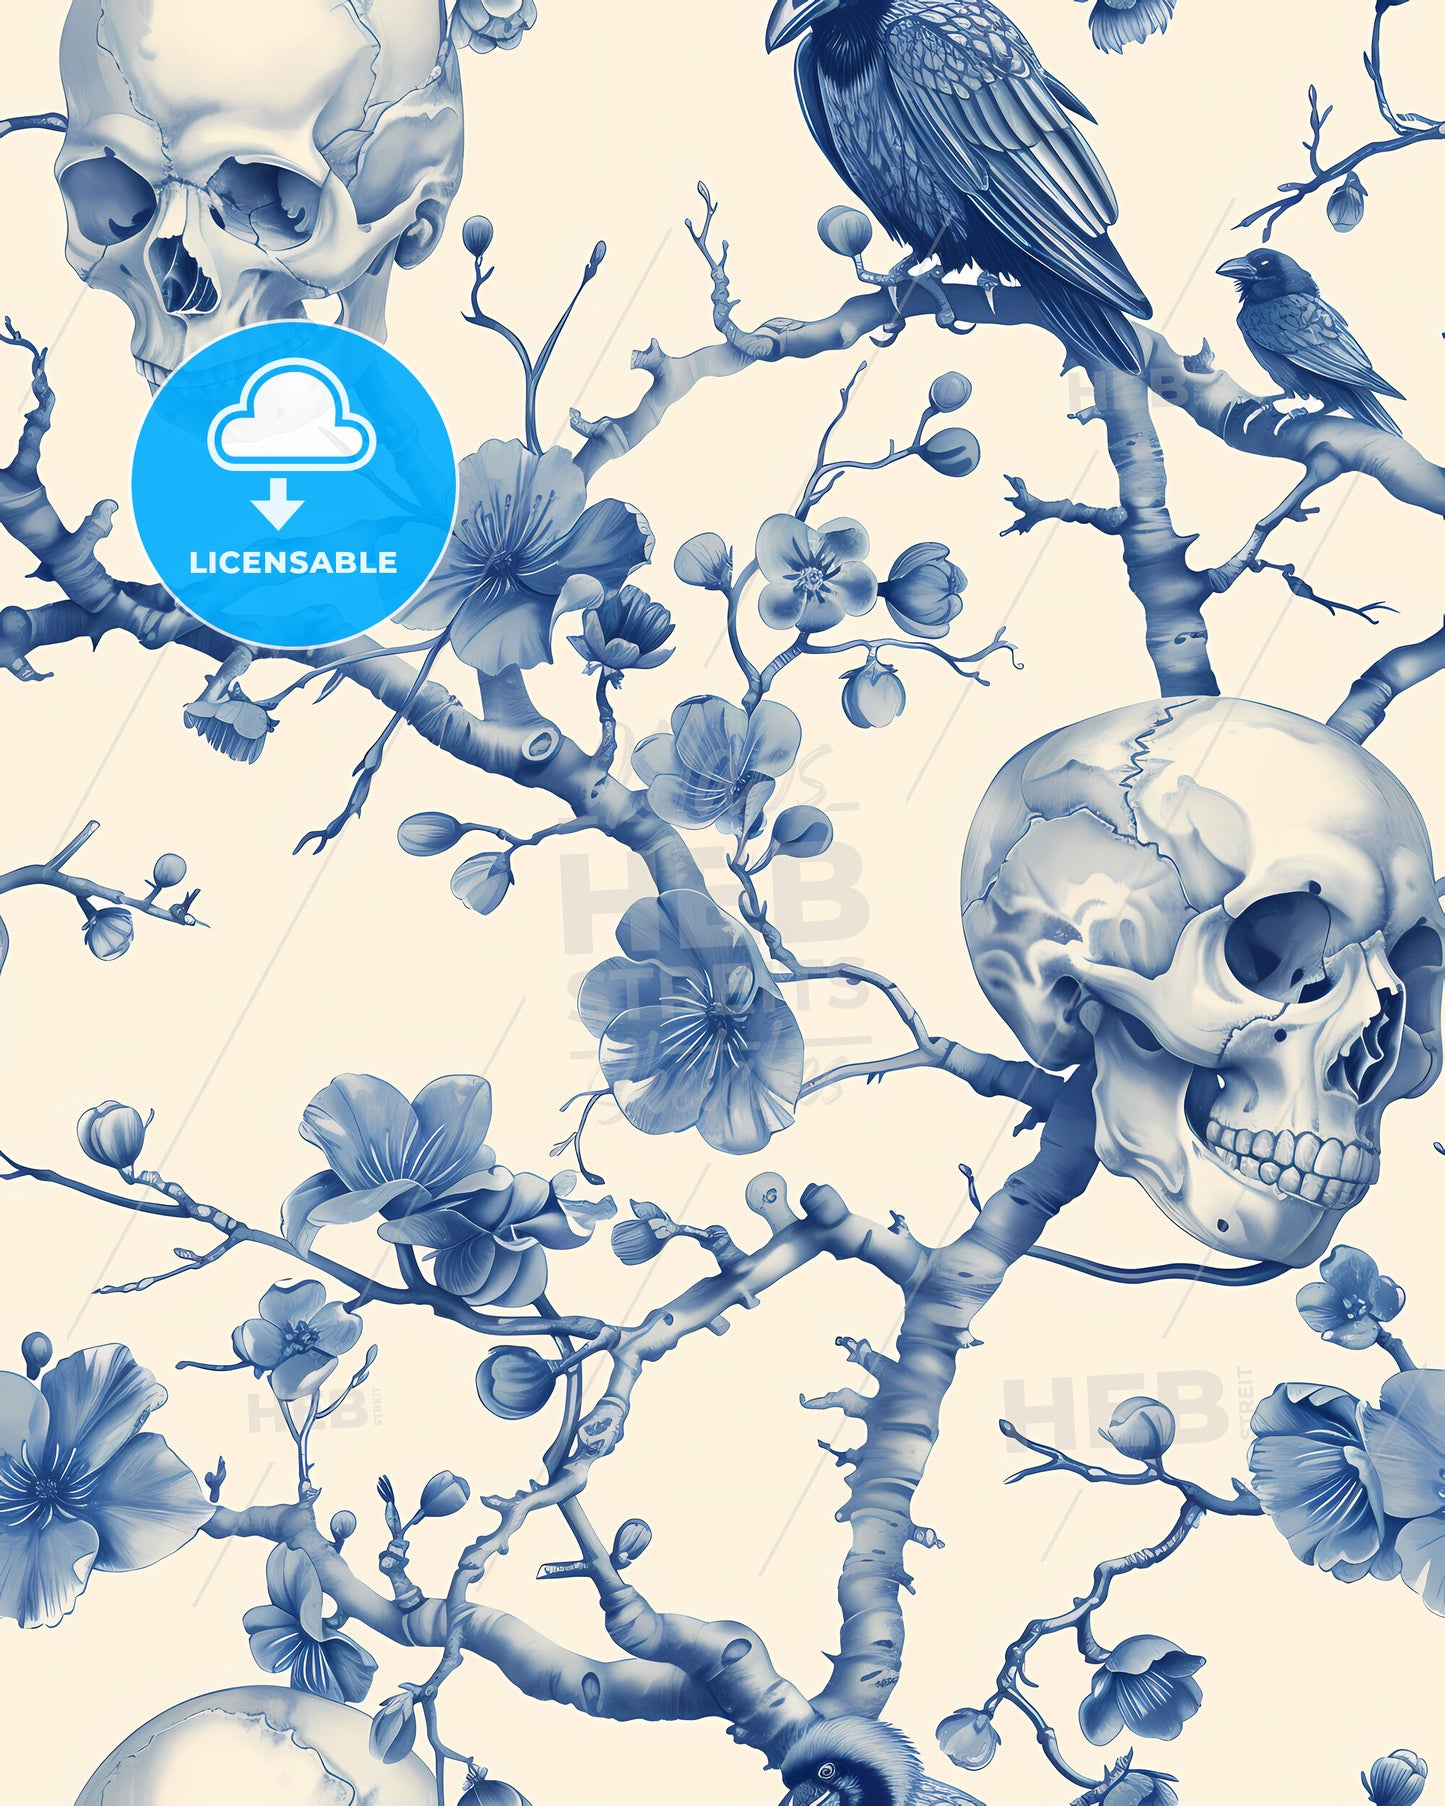 18th-century Chinoiserie Skull and Raven Wallpaper Motif in Vibrant Blue and White